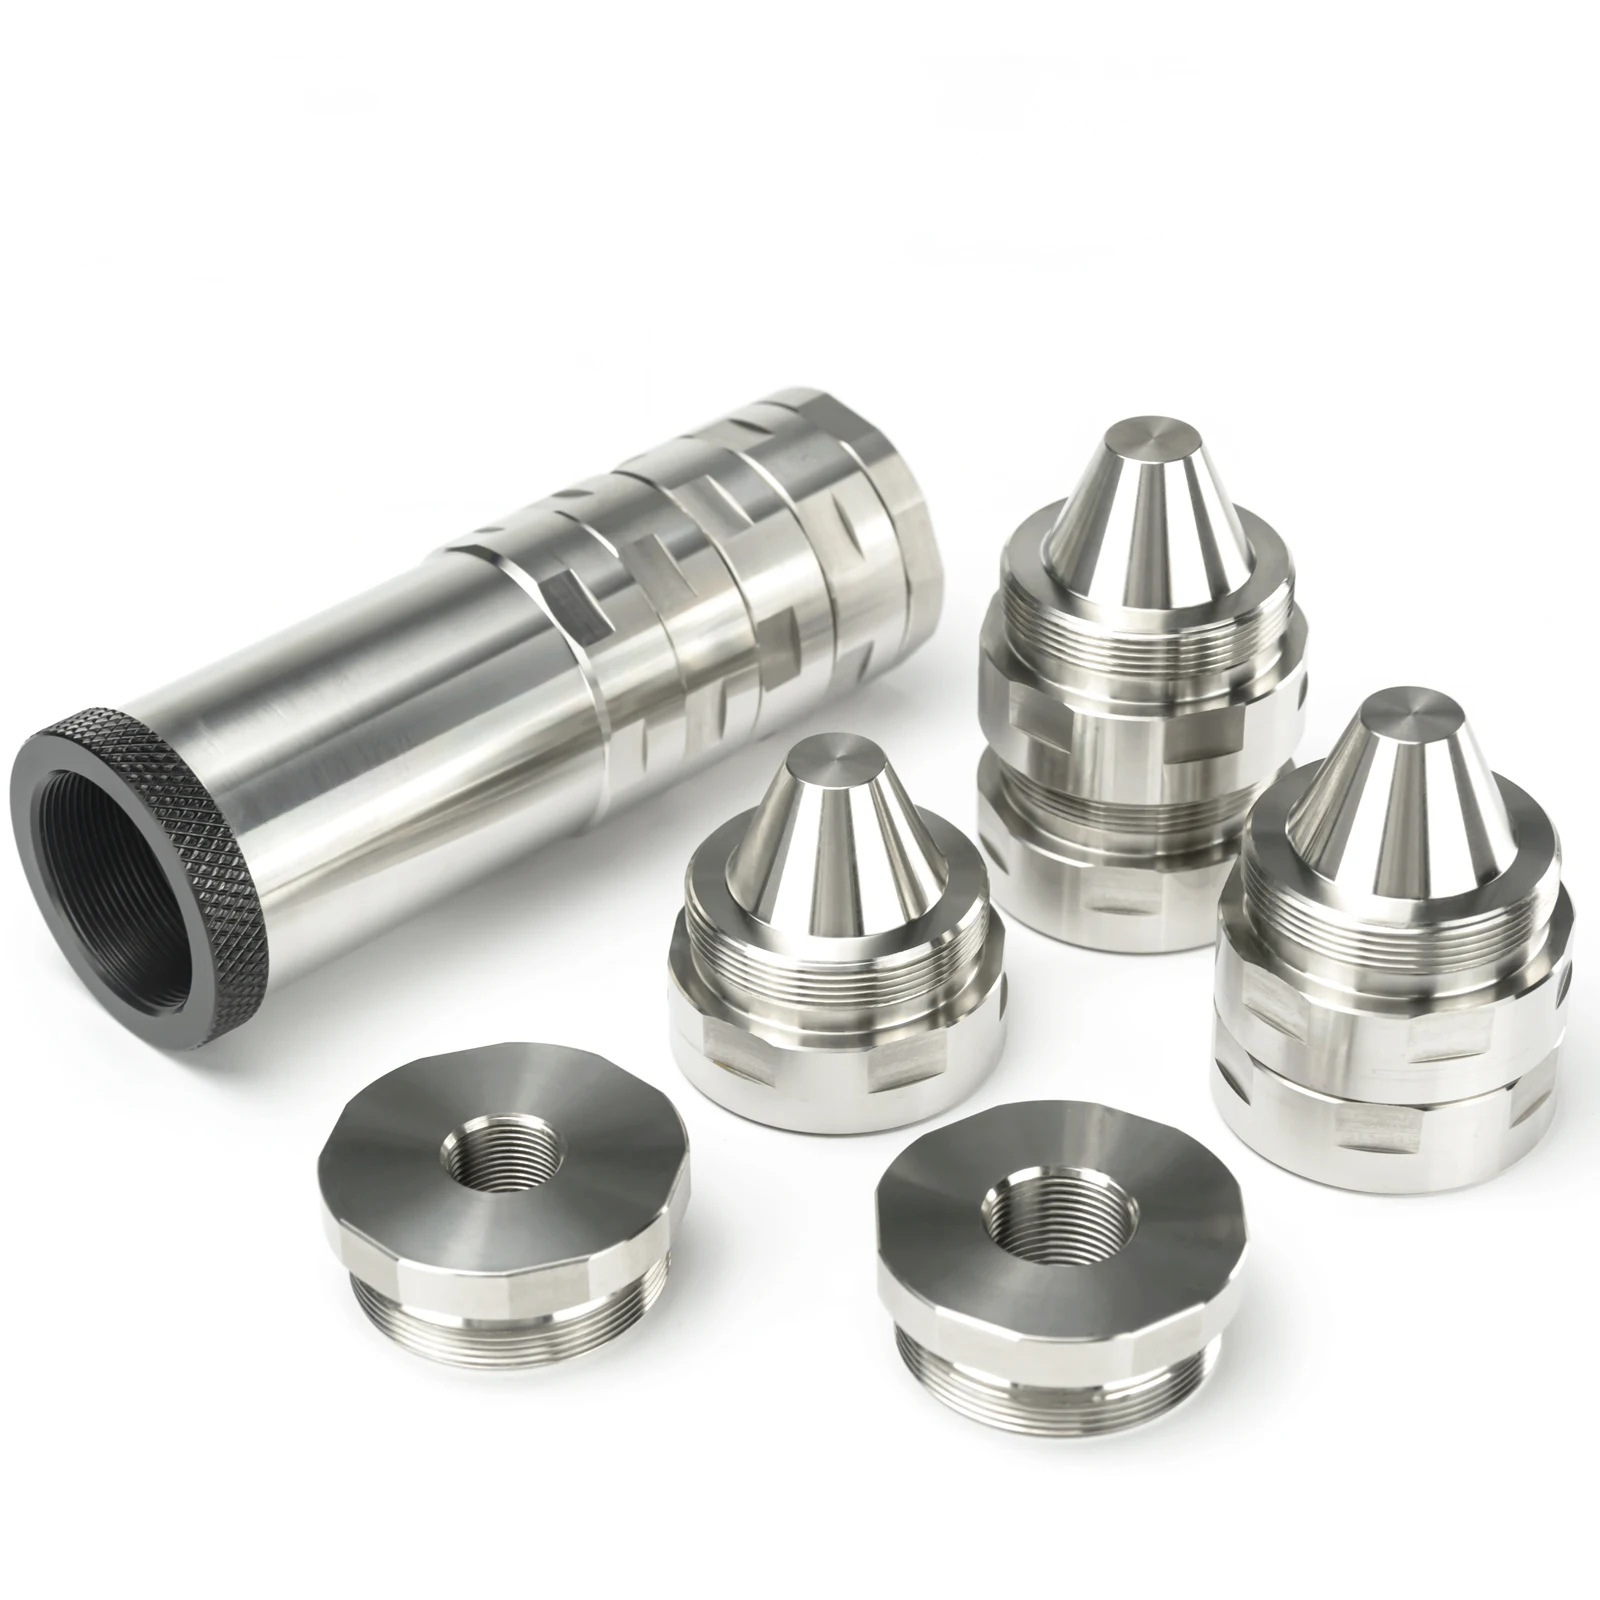 

7"L 1.5''OD 17-4 Stainless Steel Dodecagonal Modular Solvent Trap Fuel Filter 1.375x24 MST 8x Cups with 1/2x28 + 5/8x24 End Caps